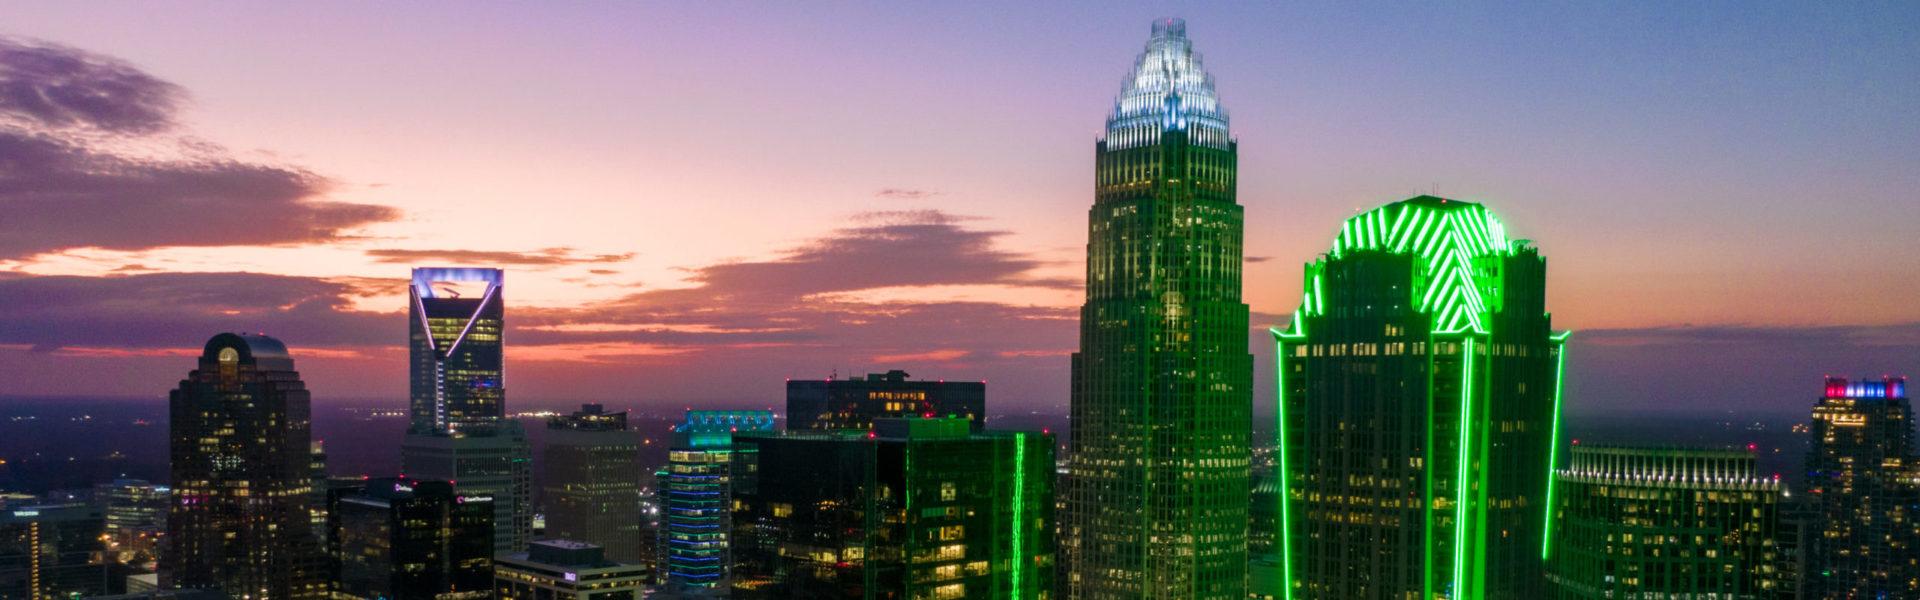 charlotte nc home of lightwave solutions lifecycle management expense management